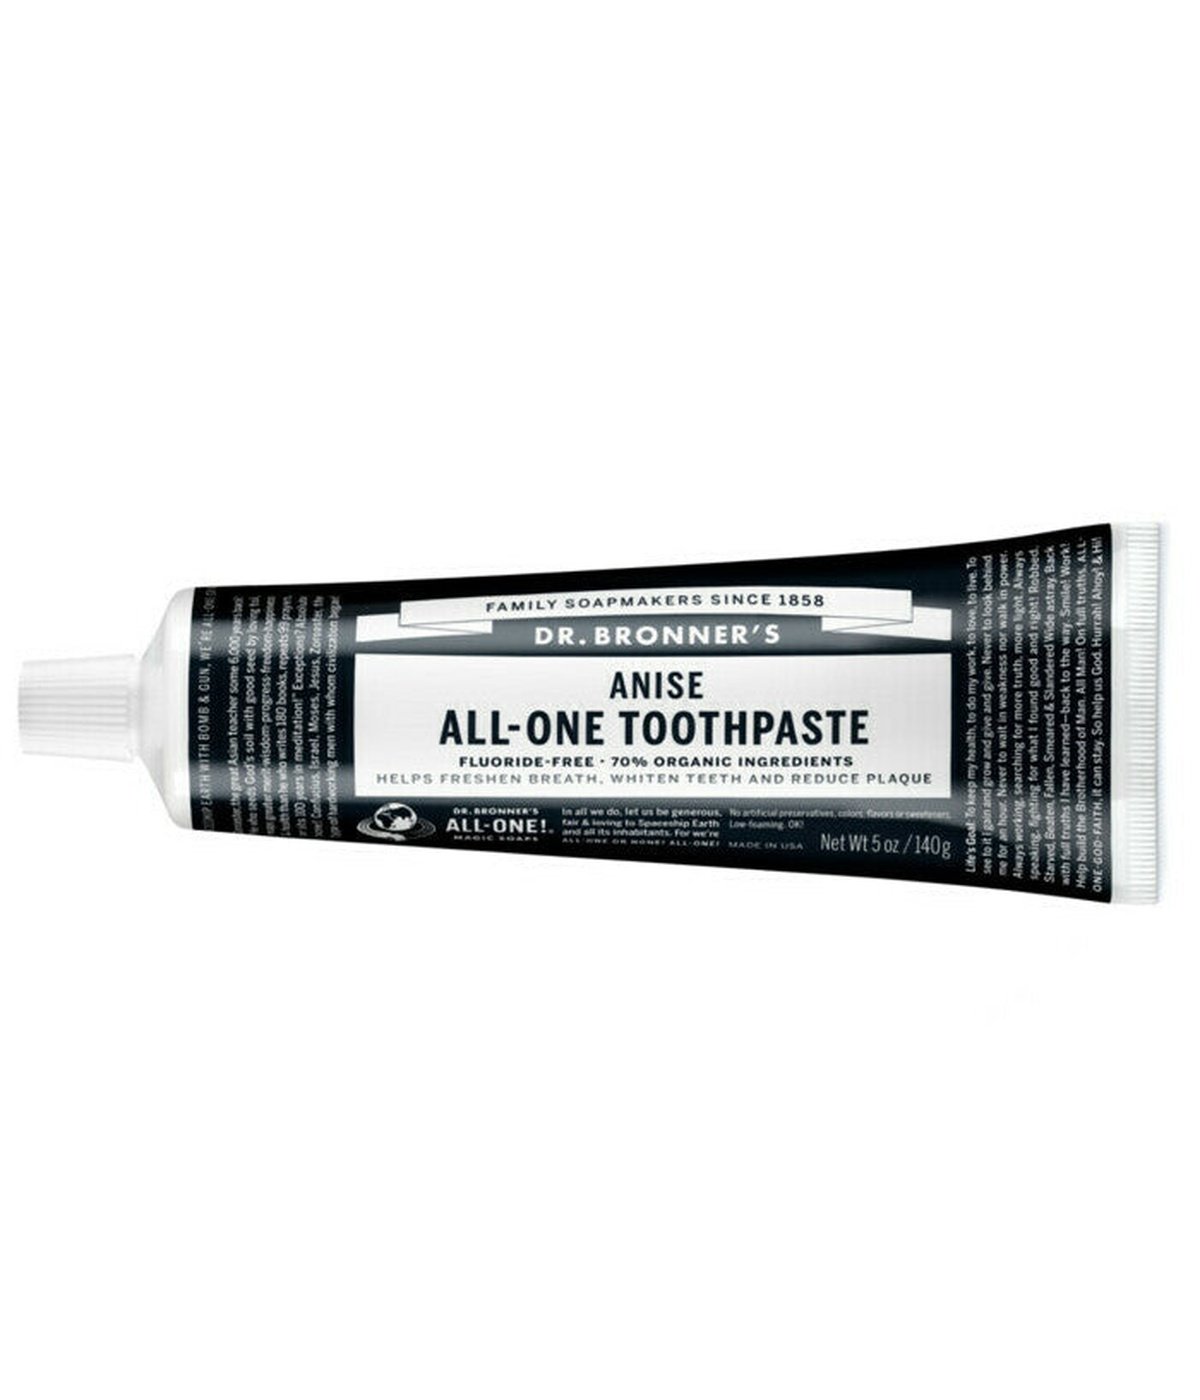 Dr Bronner's Anise Toothpaste